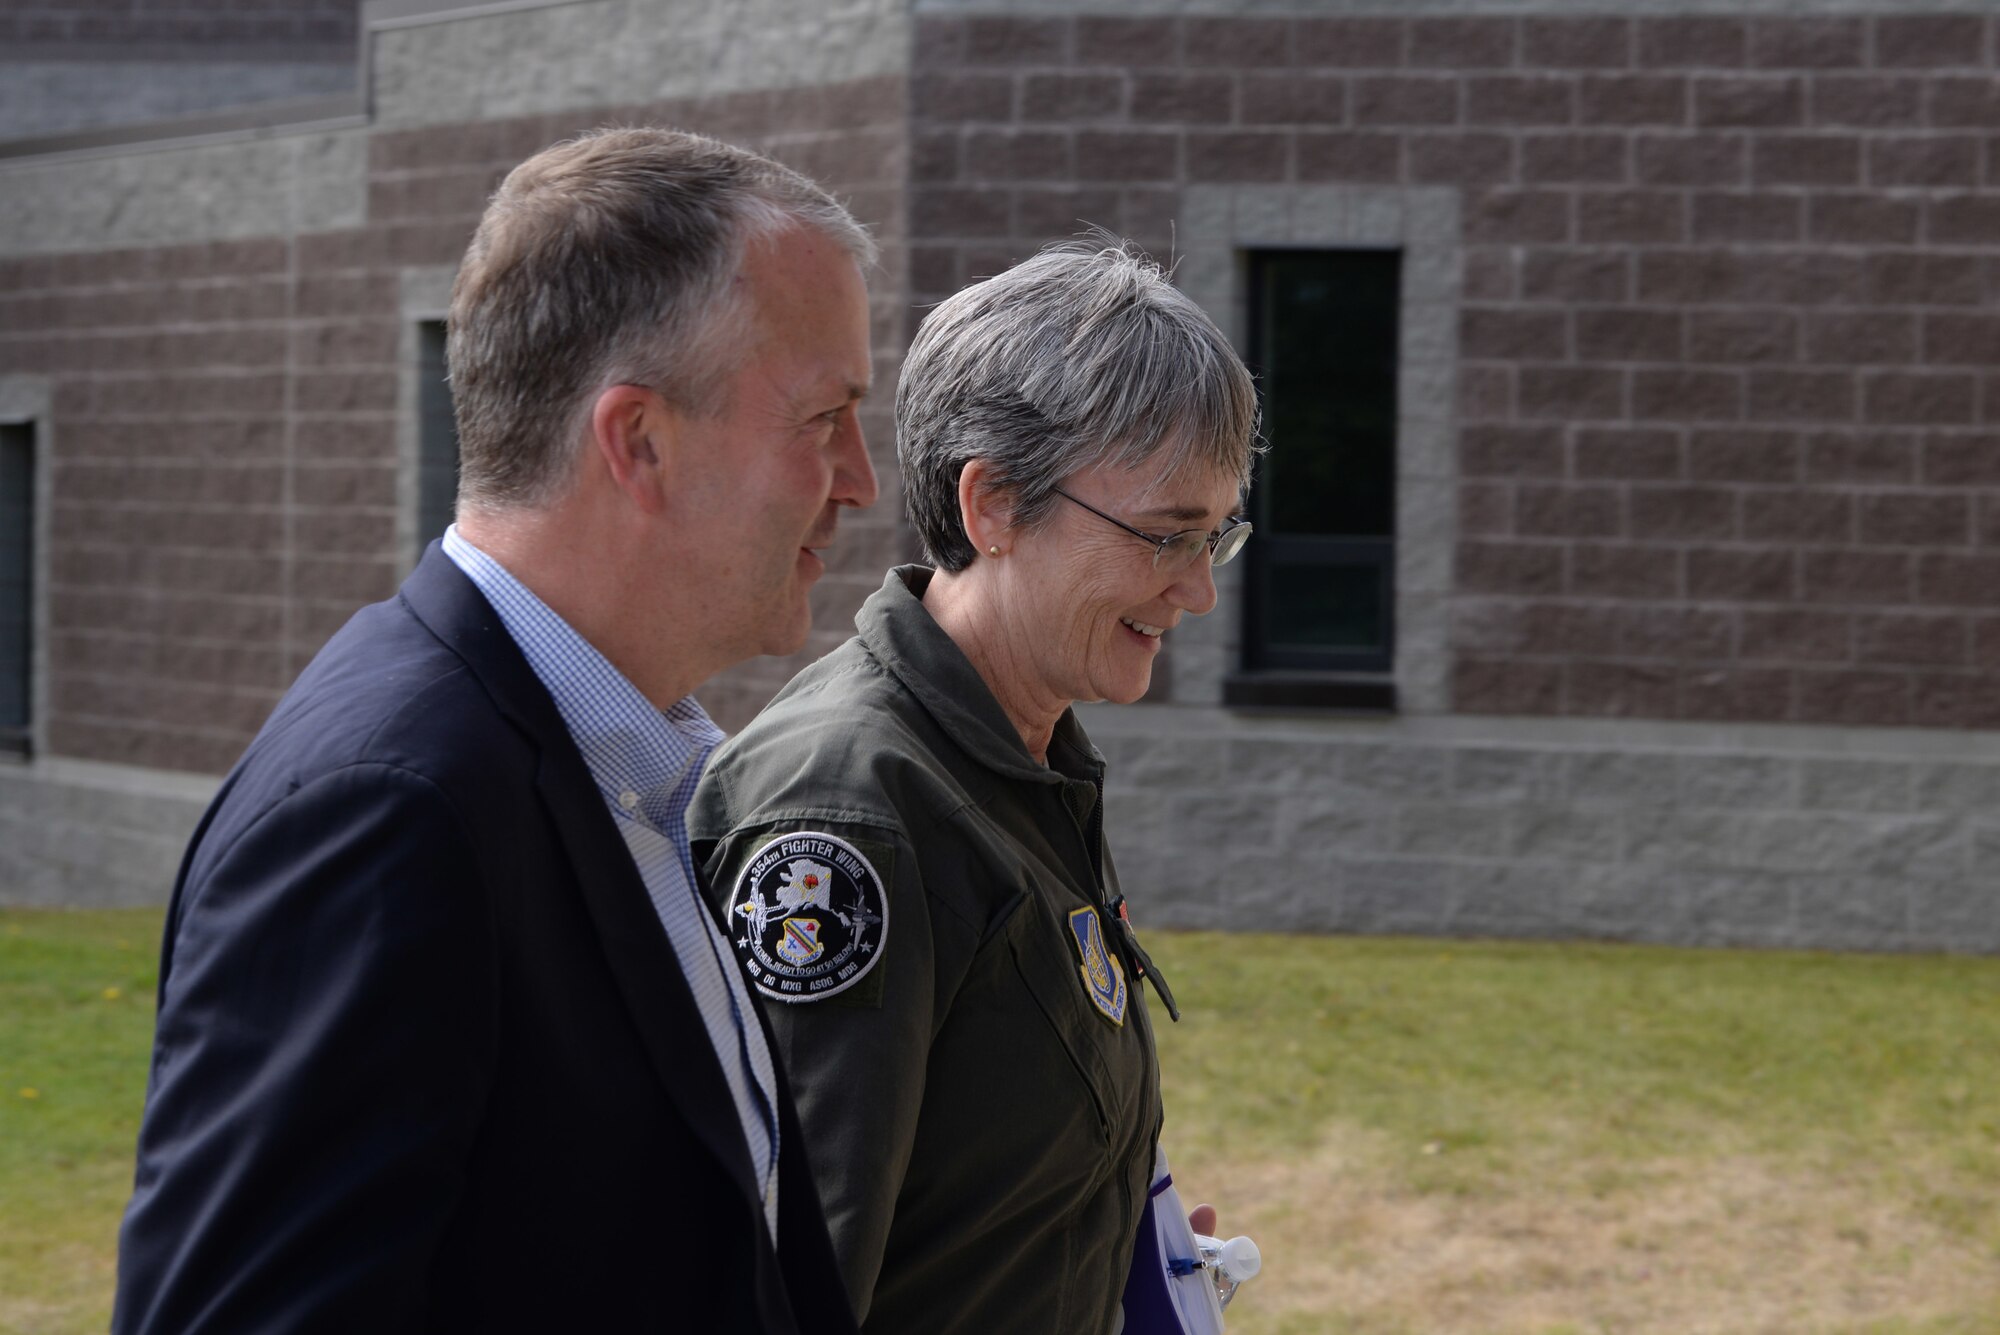 The Honorable Heather A. Wilson, the Secretary of the Air Force, walks next to the Honorable Dan Sullivan, a United States senator from Alaska, Aug. 10, 2018, at Eielson Air Force Base, Alaska. Wilson held a town hall for 354th Fighter Wing Airmen in the base’s theater. (U.S. Air Force photo by Airman 1st Class Eric M. Fisher)